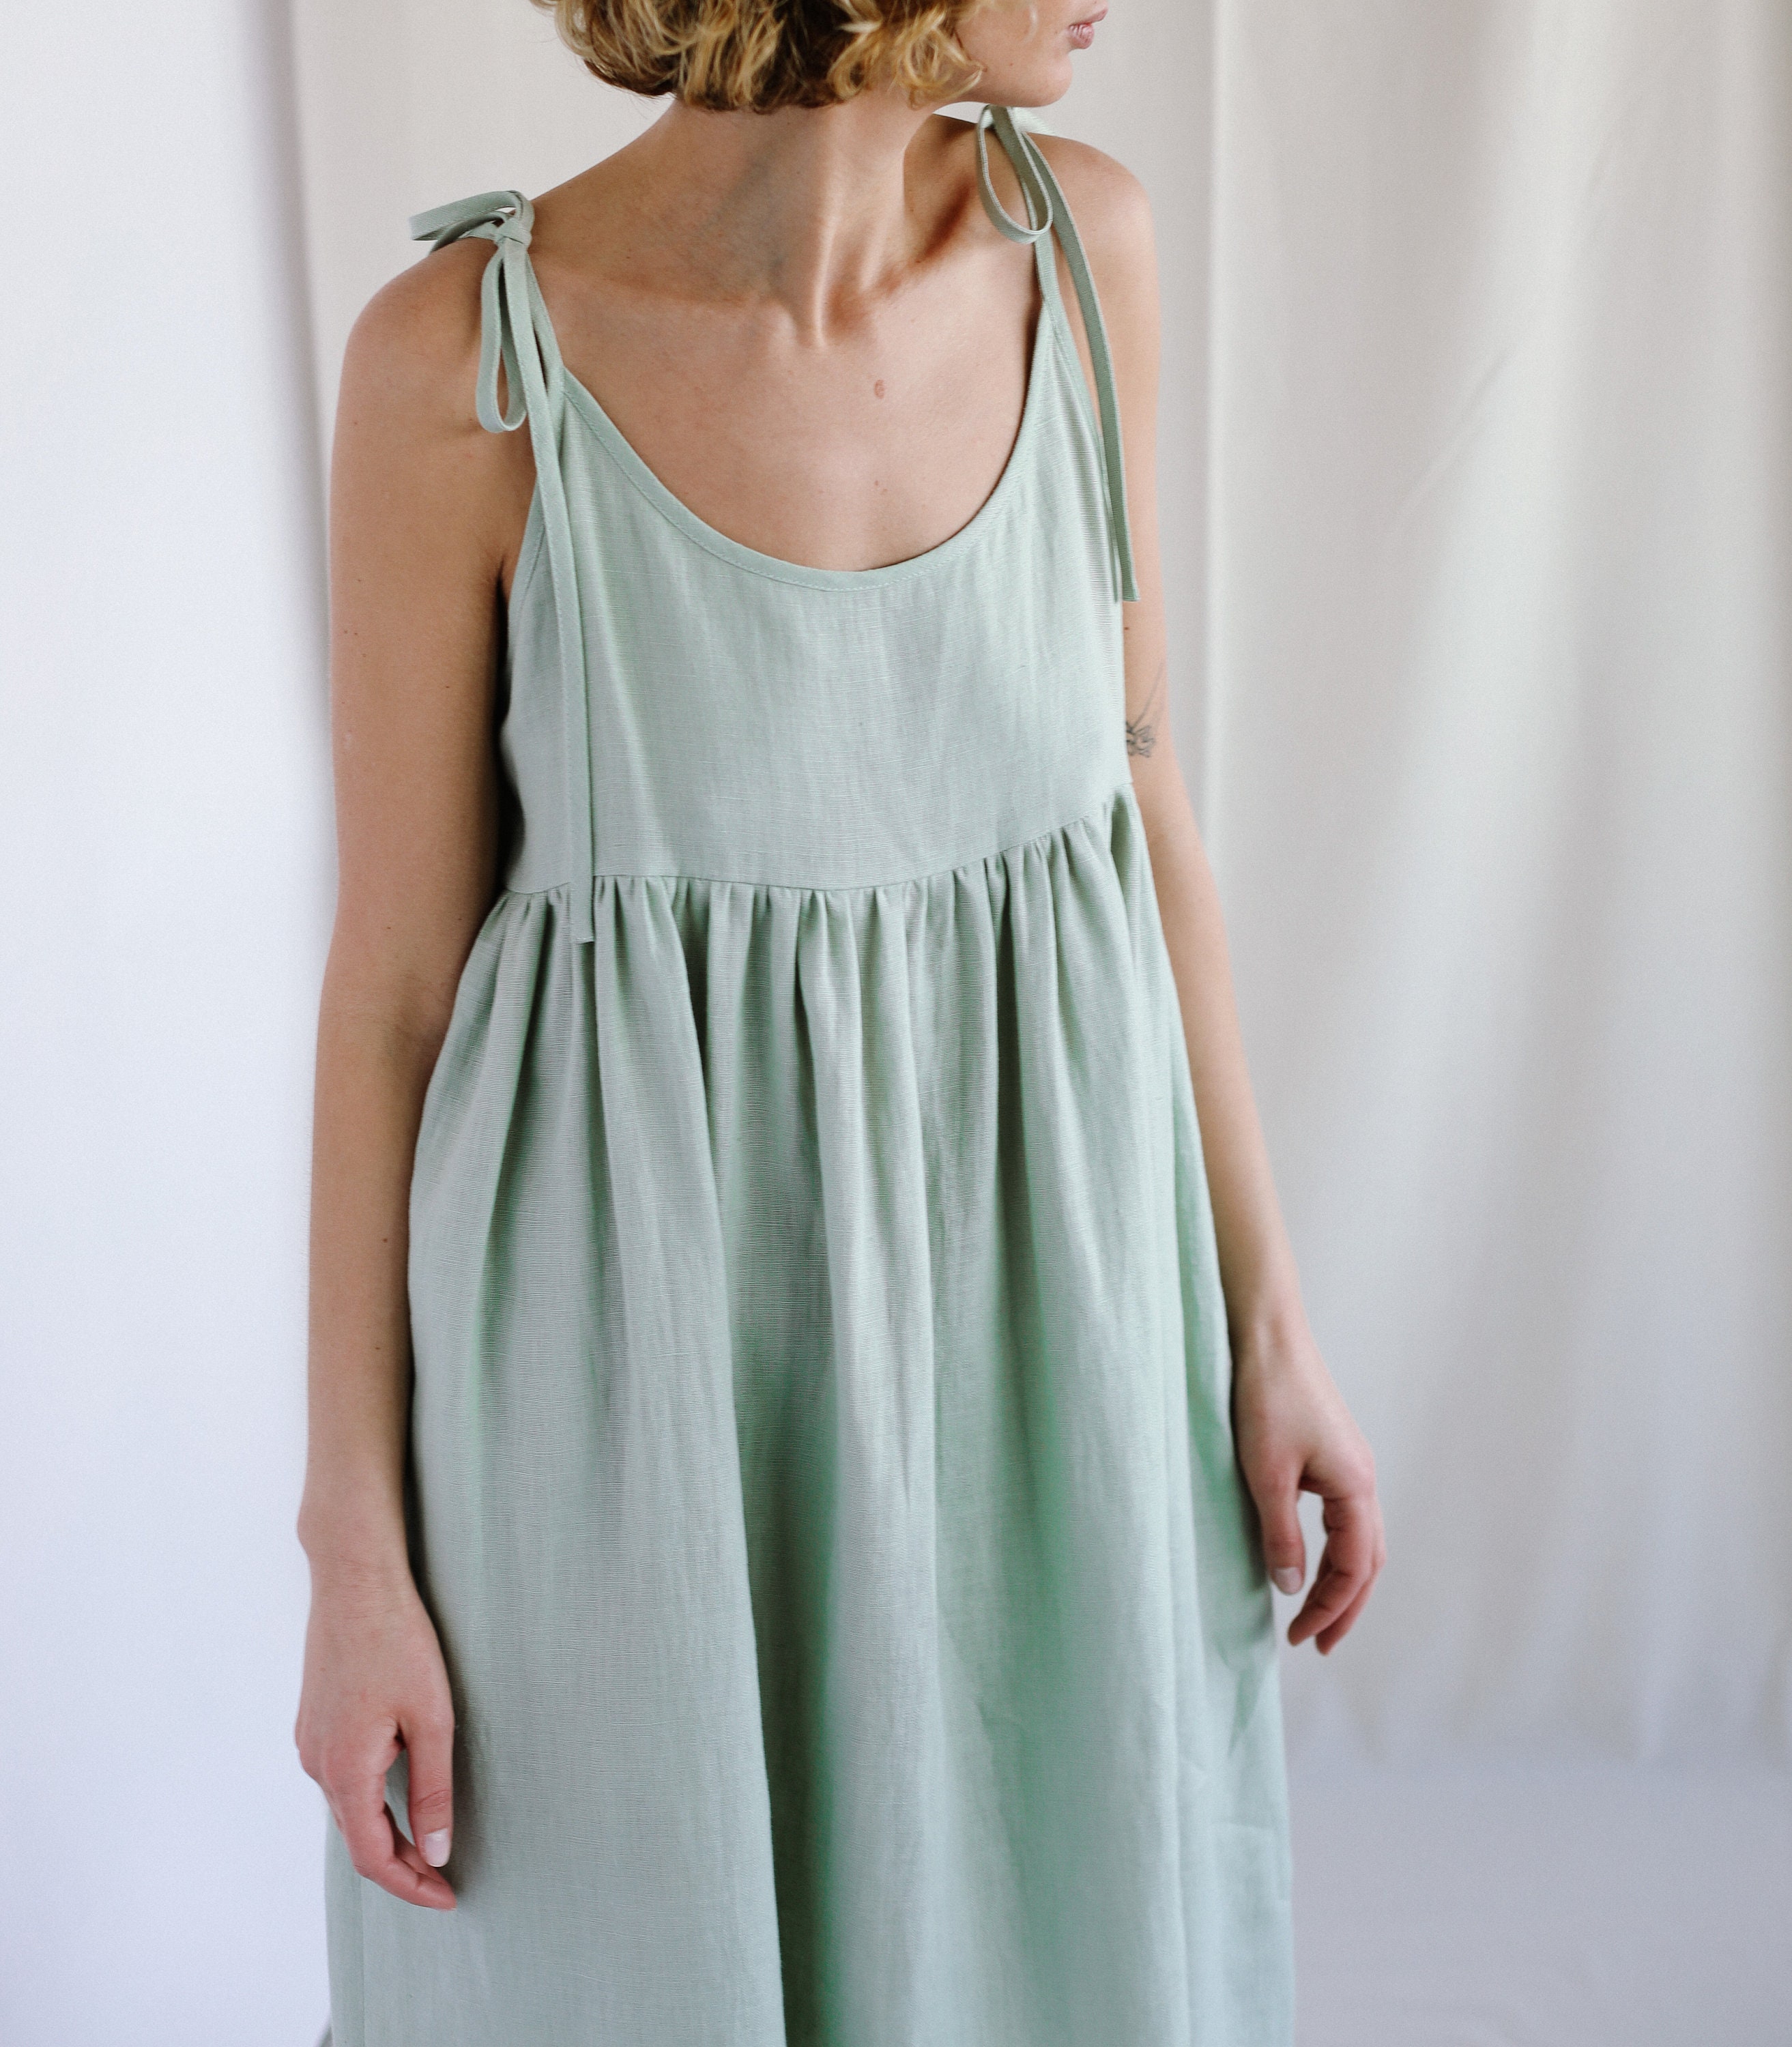 Loose Linen Dress in Sage Green Color / Handmade by OFFON | Etsy Canada